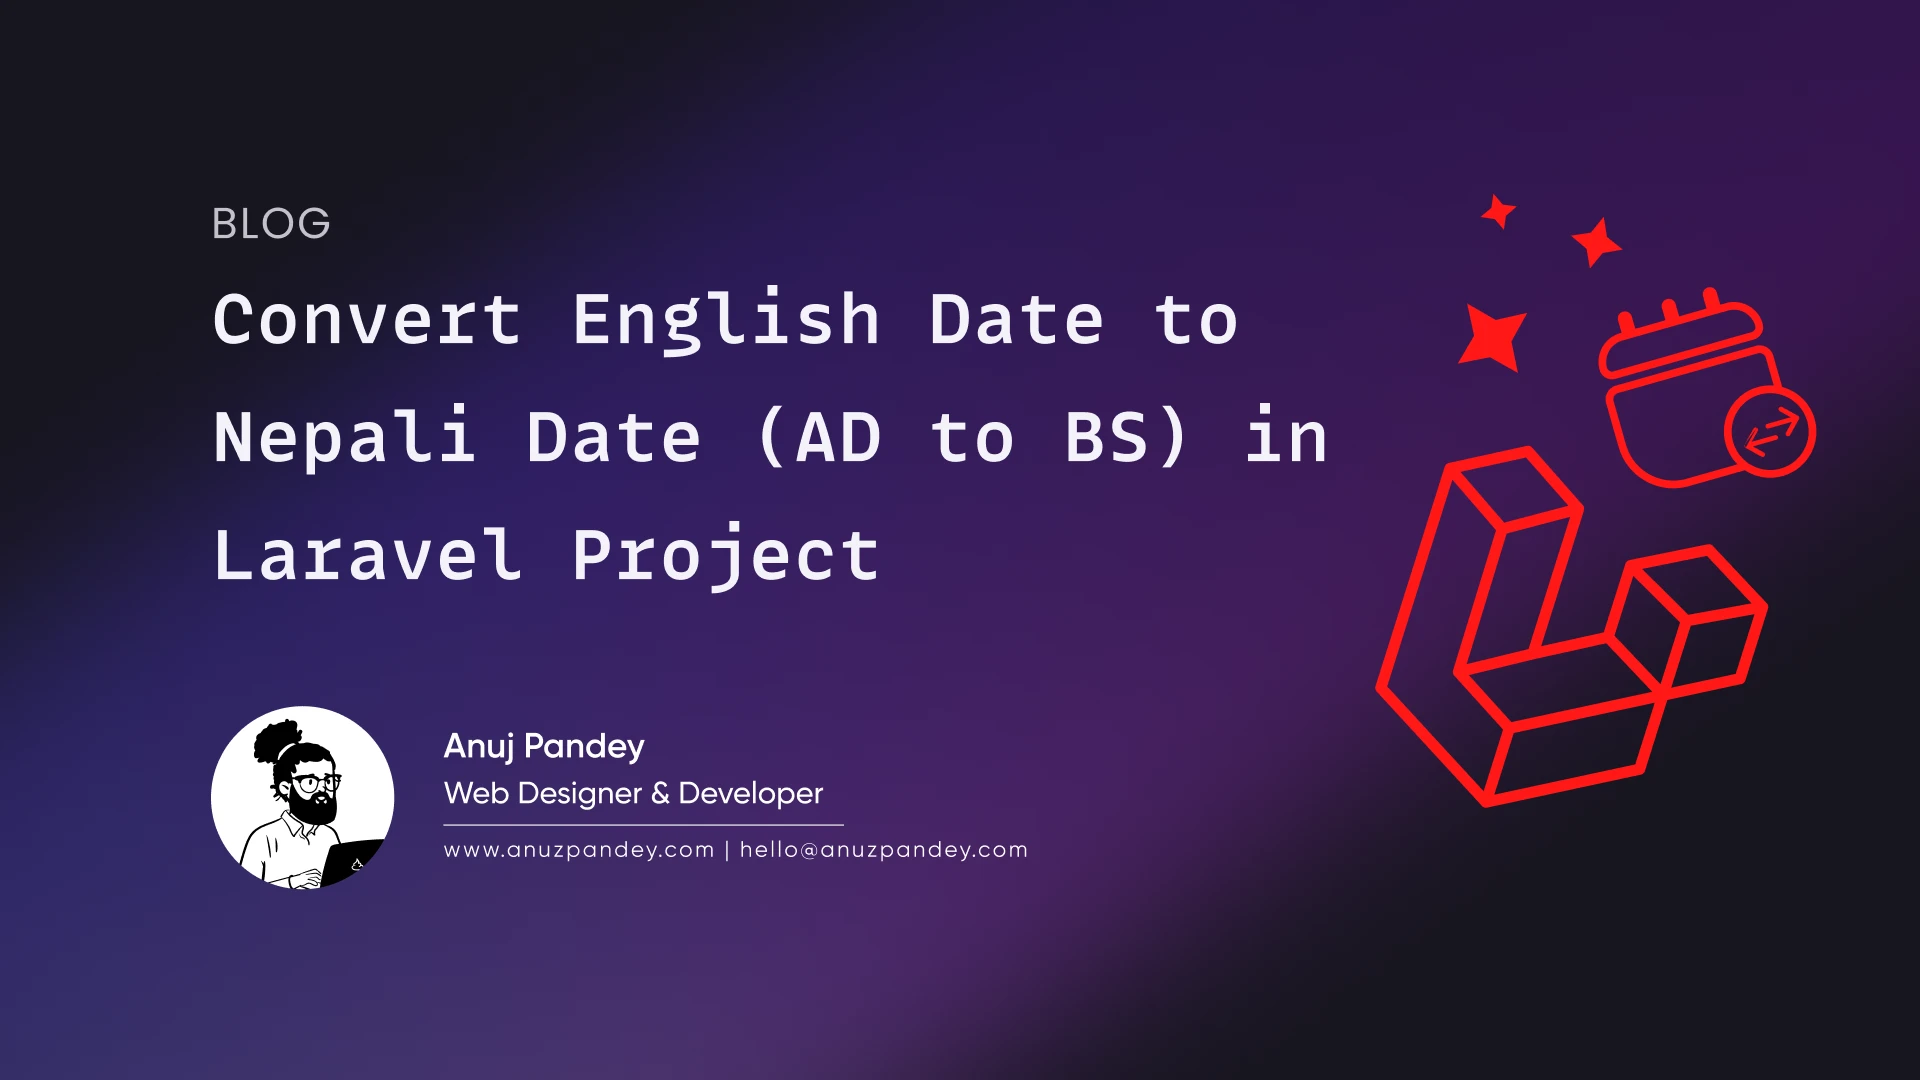 Convert English Date to Nepali Date (AD to BS) in Laravel Project